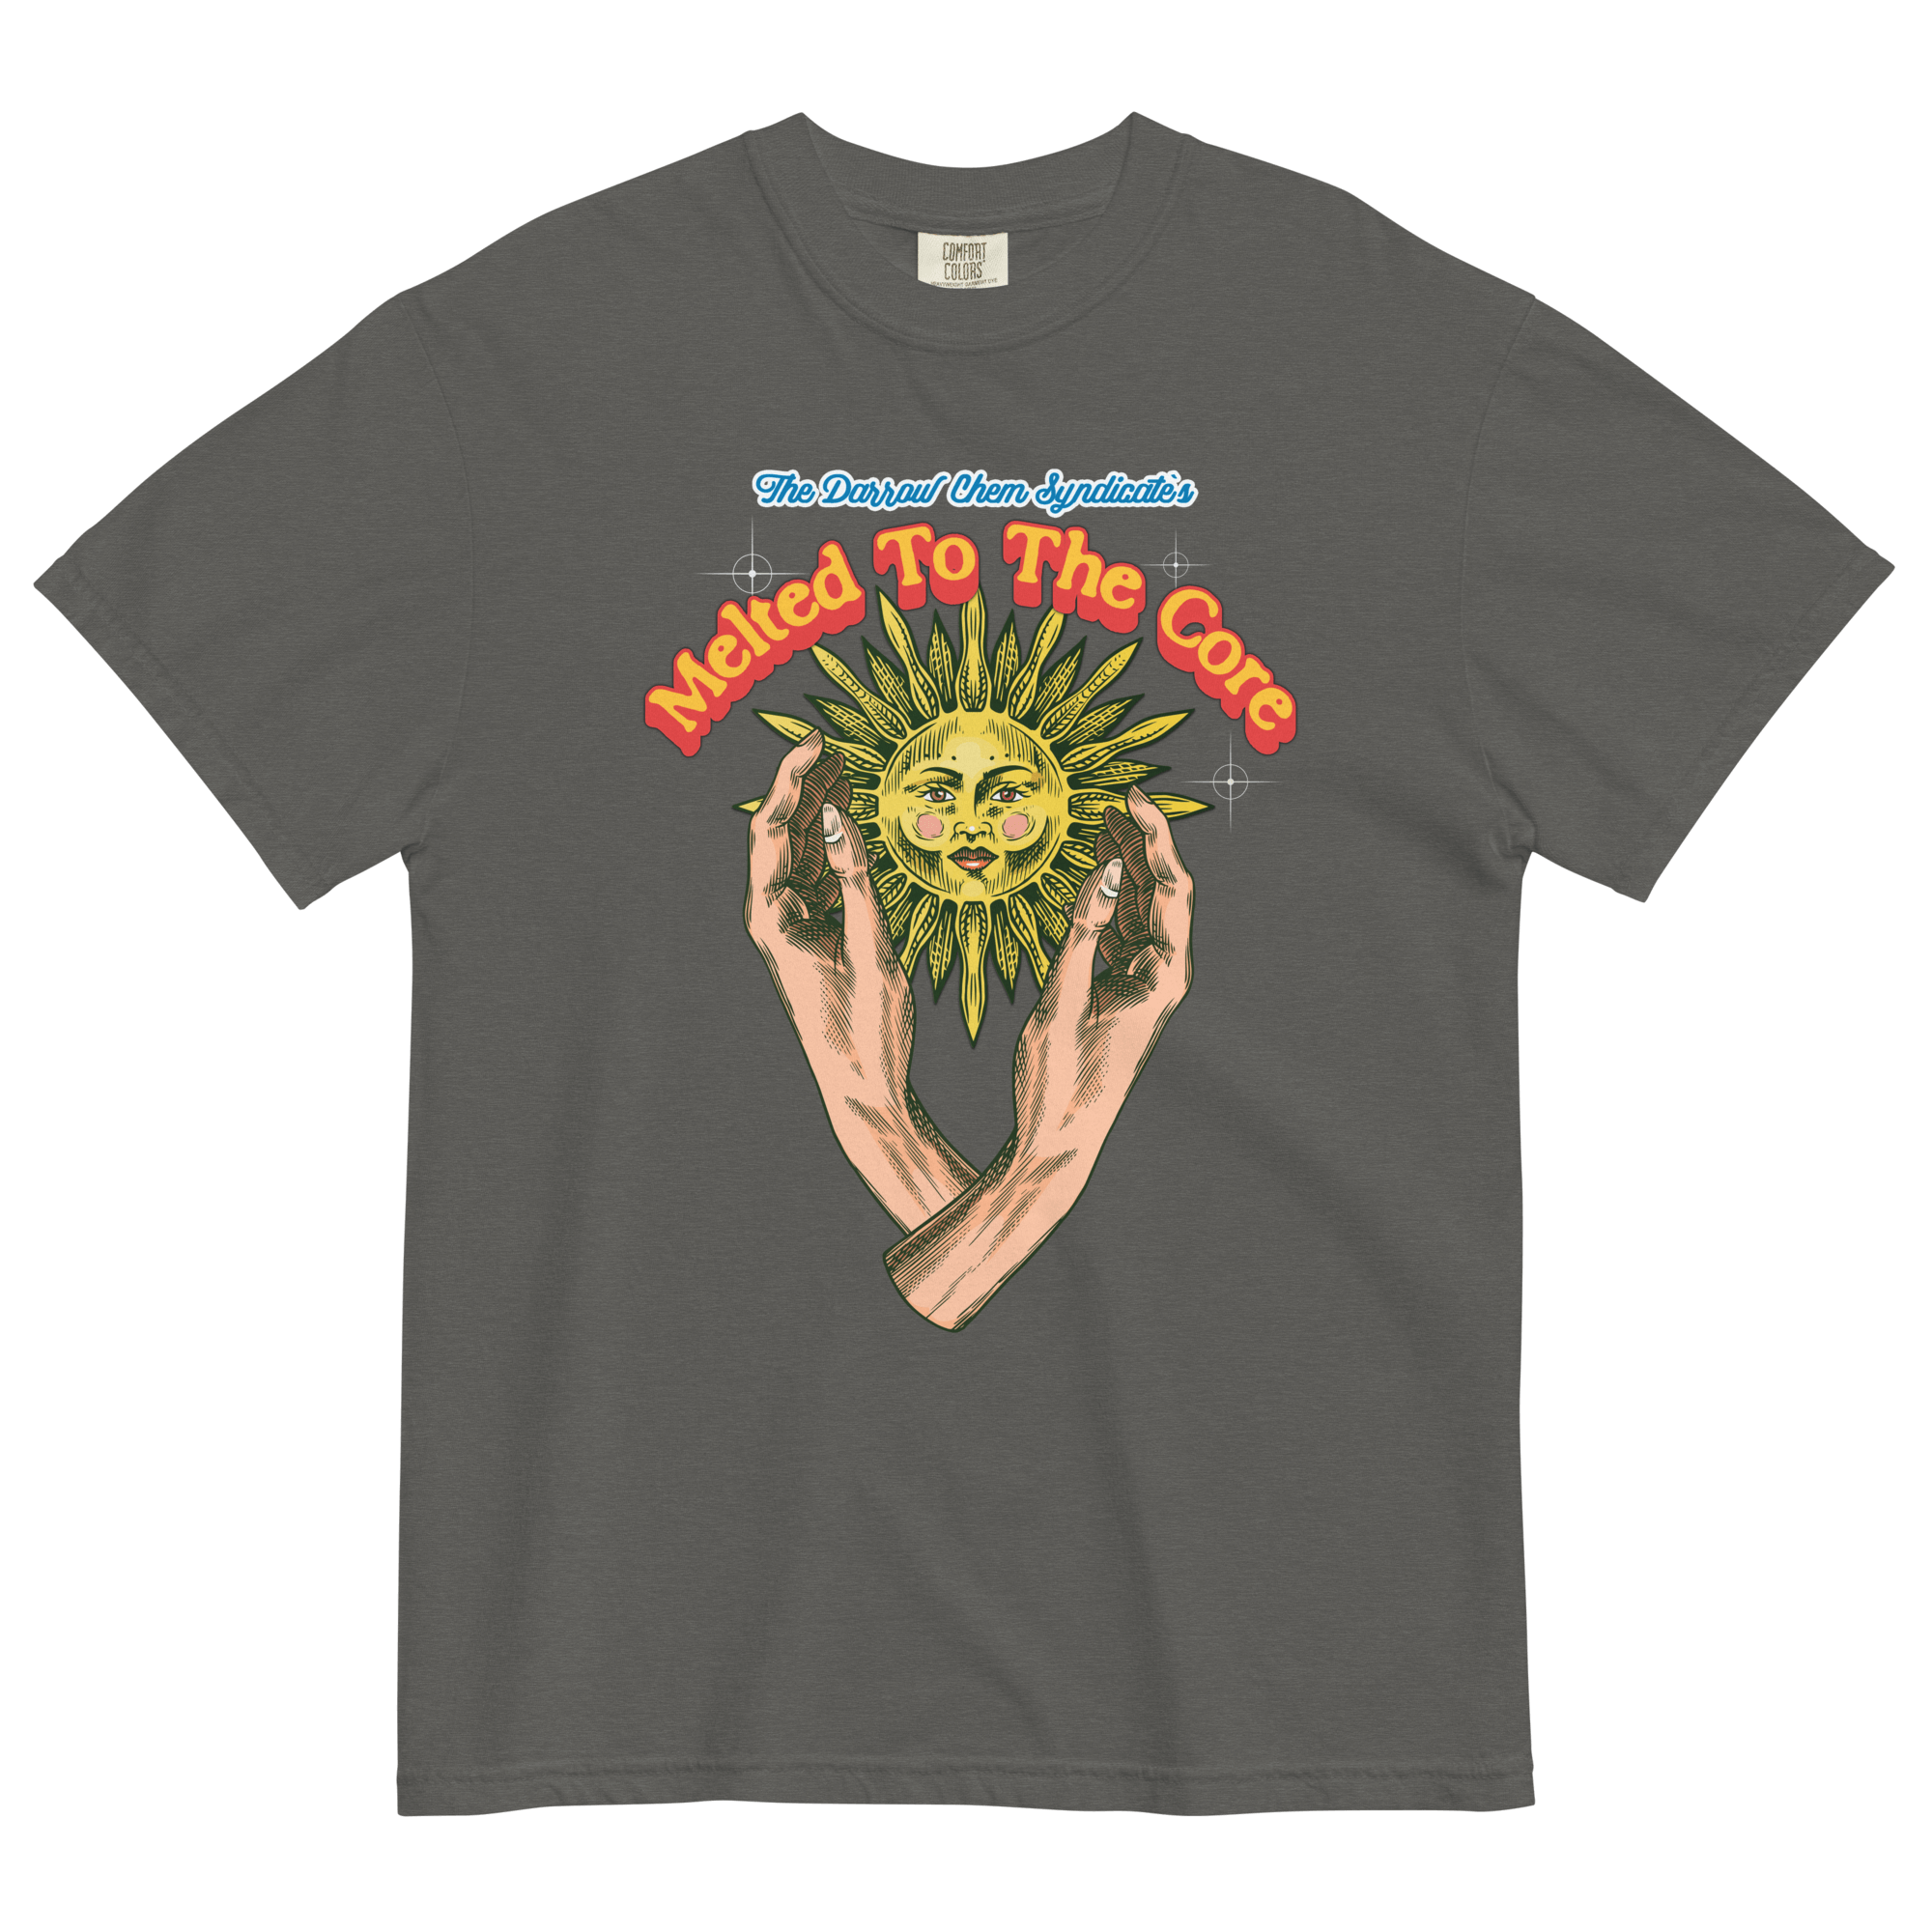 Melted To The Core T-shirtGet groovy in our Melted To The Core T-shirt! Premium cotton, hip style, made for comfort. Dive into cool streetwear now. • 100% ring-spun cotton • Fabric weight: 6.1 oz/yd² (206.8 g/m²) • Garment-dyed • Relaxed fit • 7/8″ double